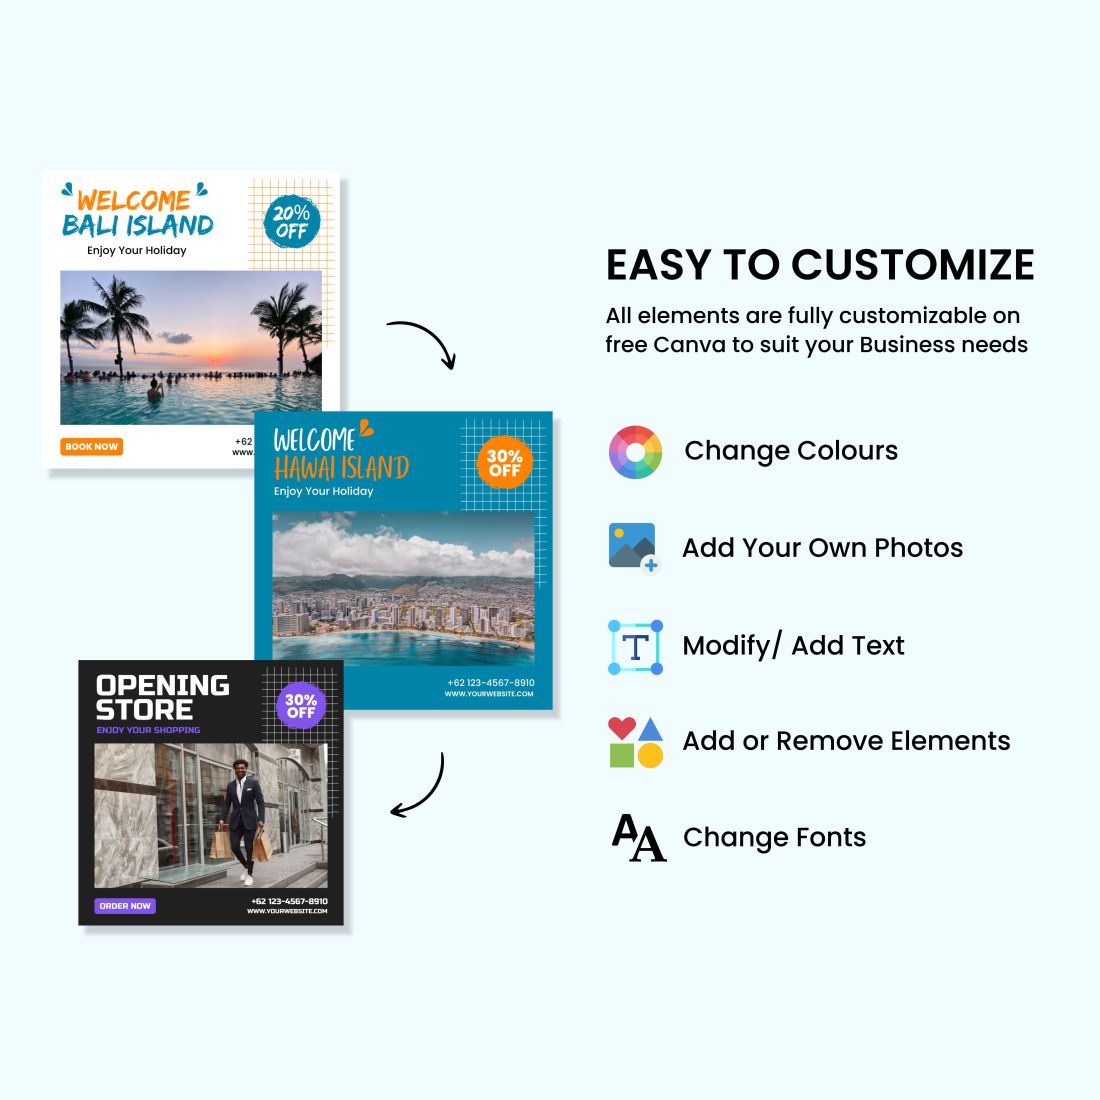 Travel Agency Instagram Canva Template Customize.